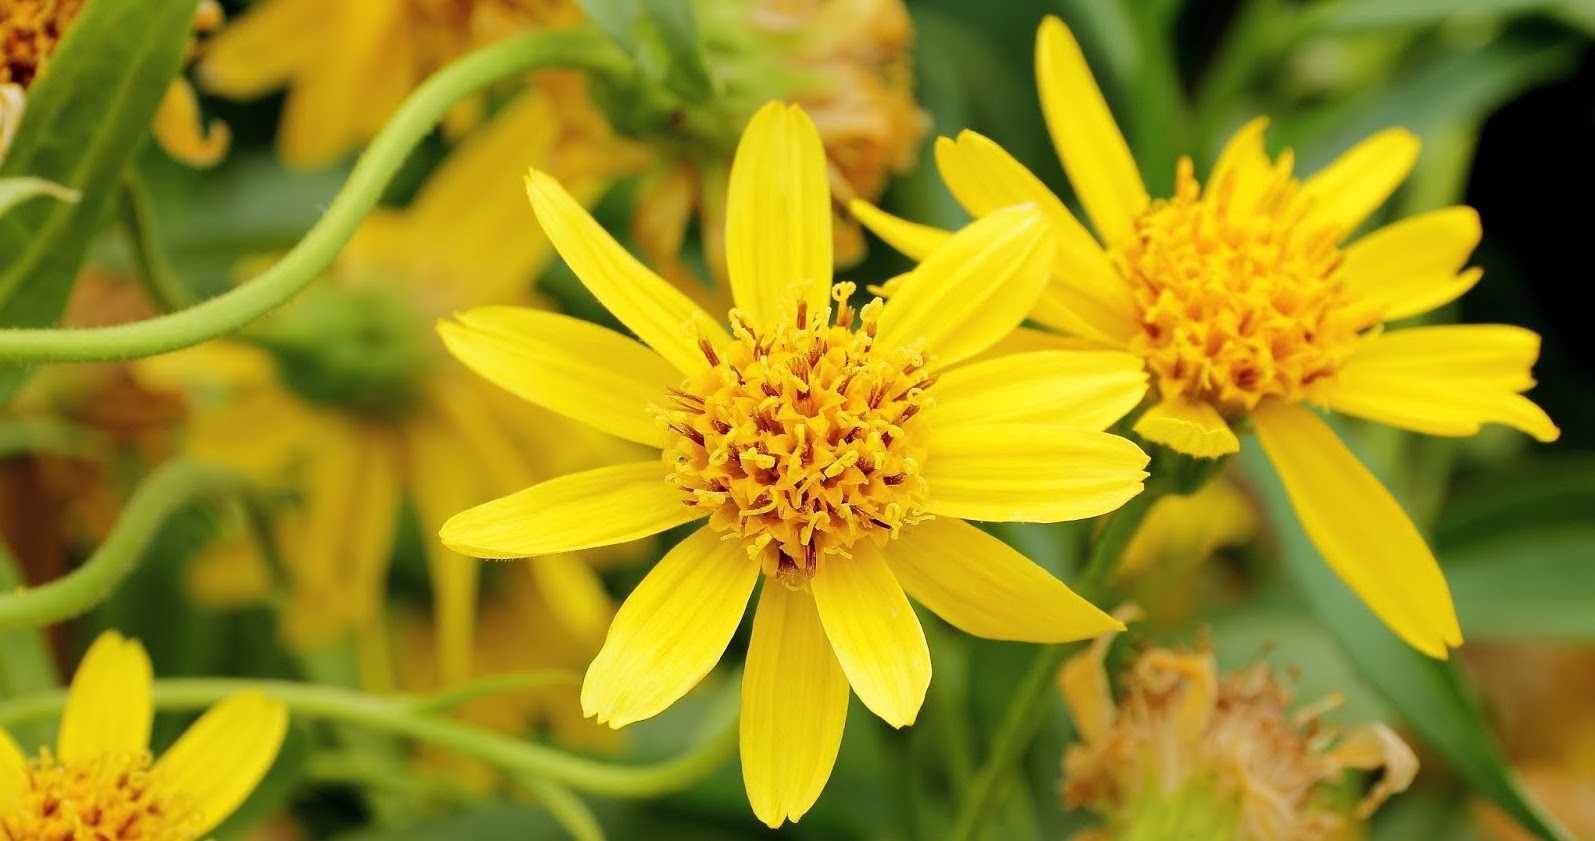 Blog Post 3 - Scientific Evidence Proves That Arnica Helps Relieve Aches And Sprains